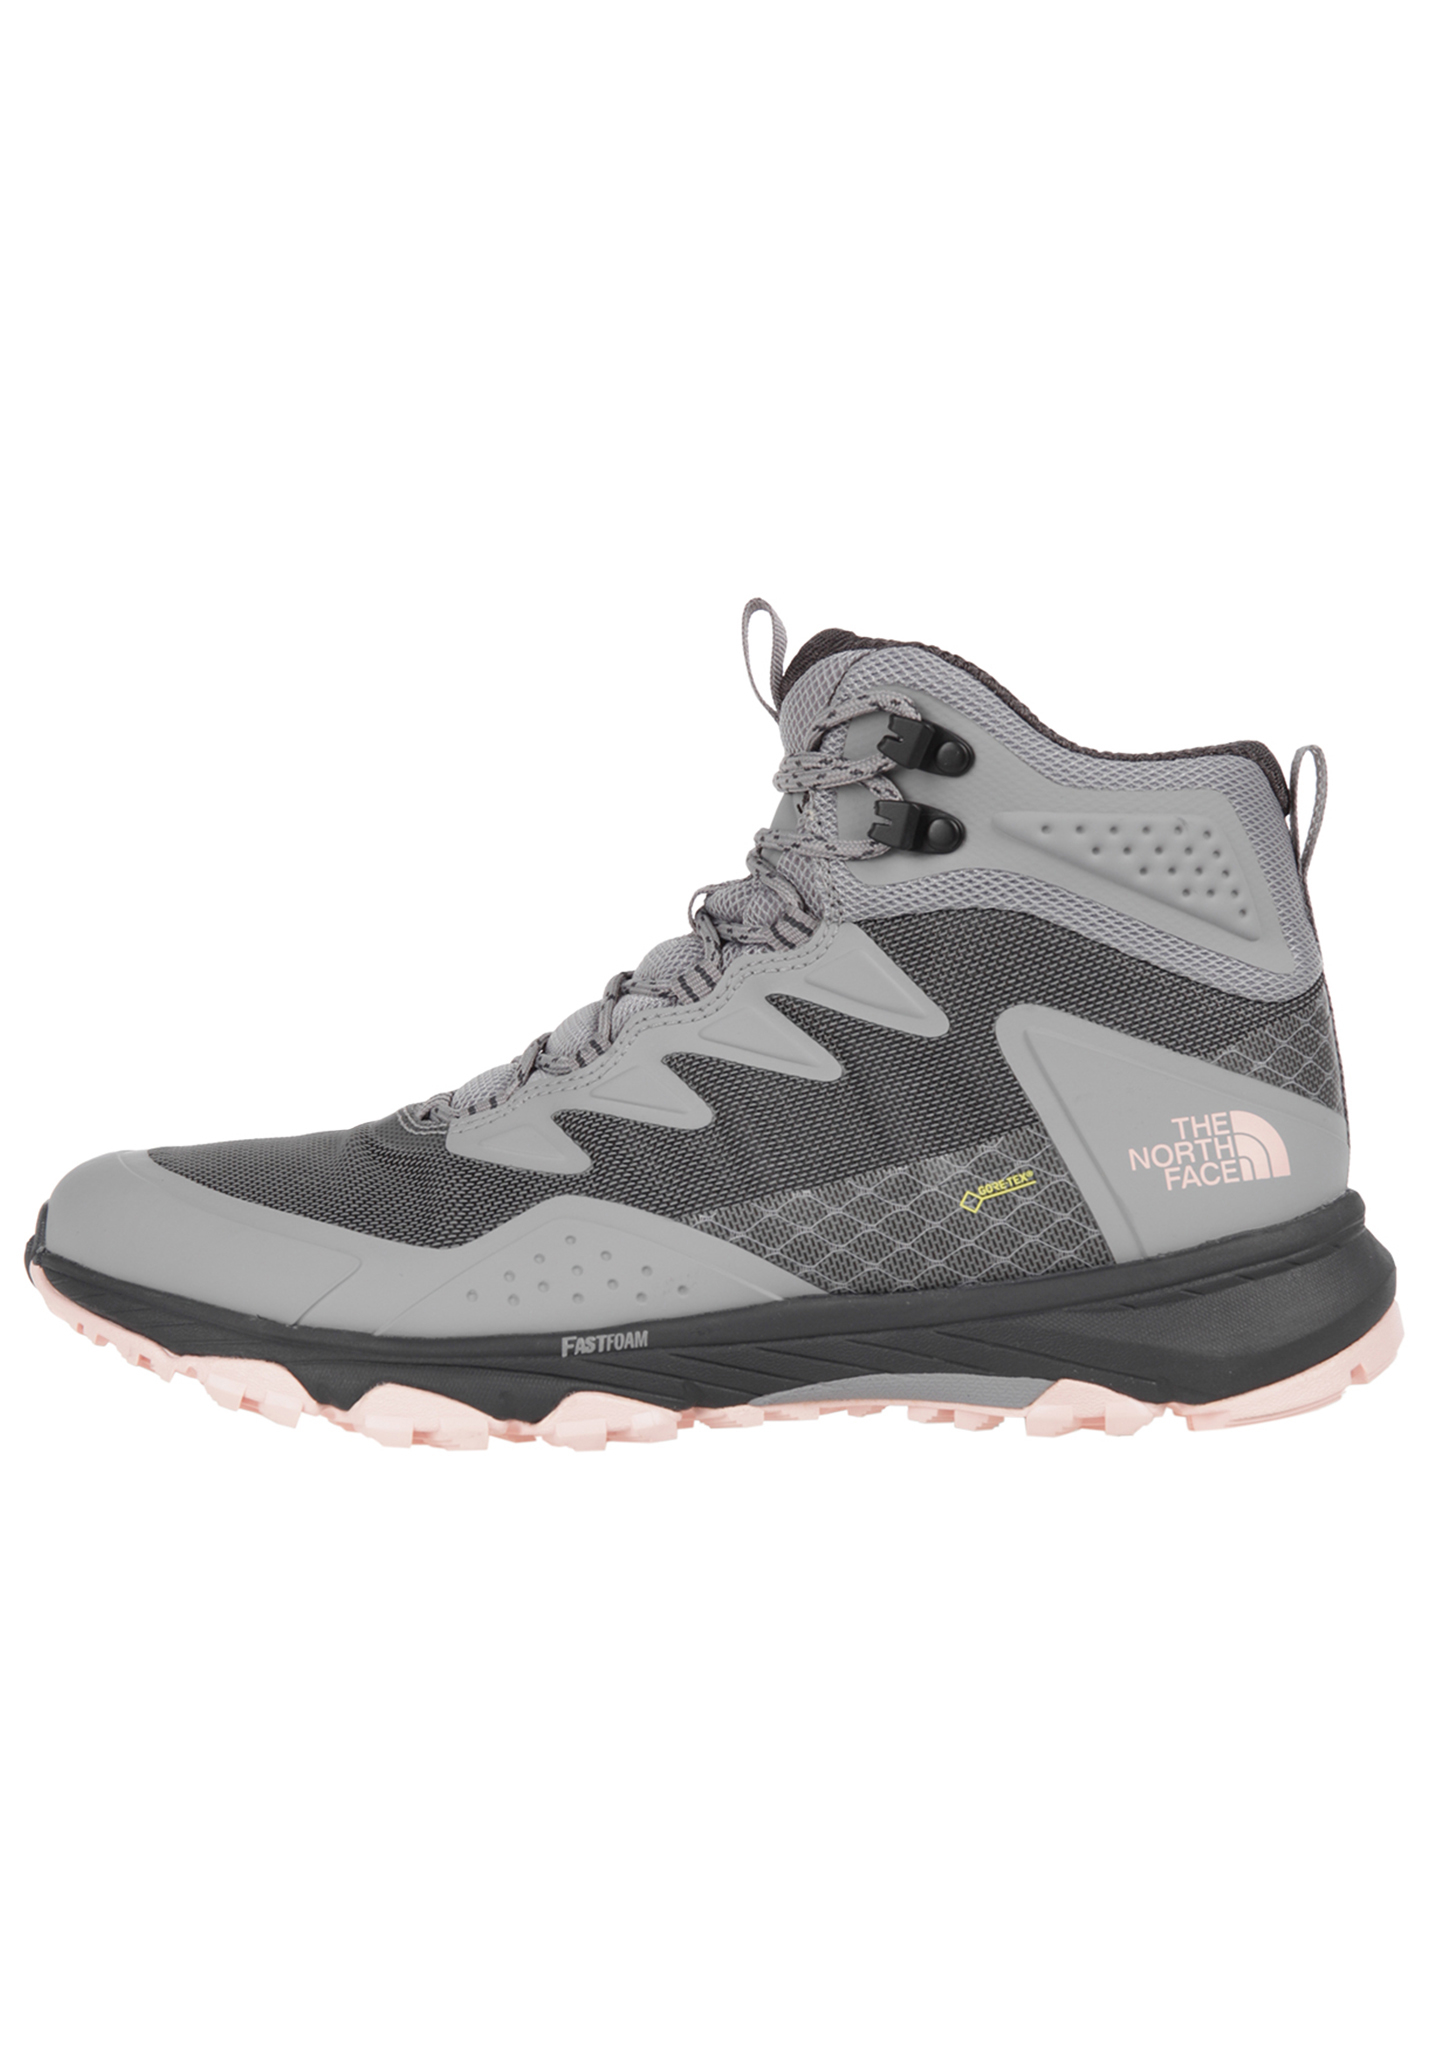 The North Face Utra Fastpack III Mid GTX Boots blau 42